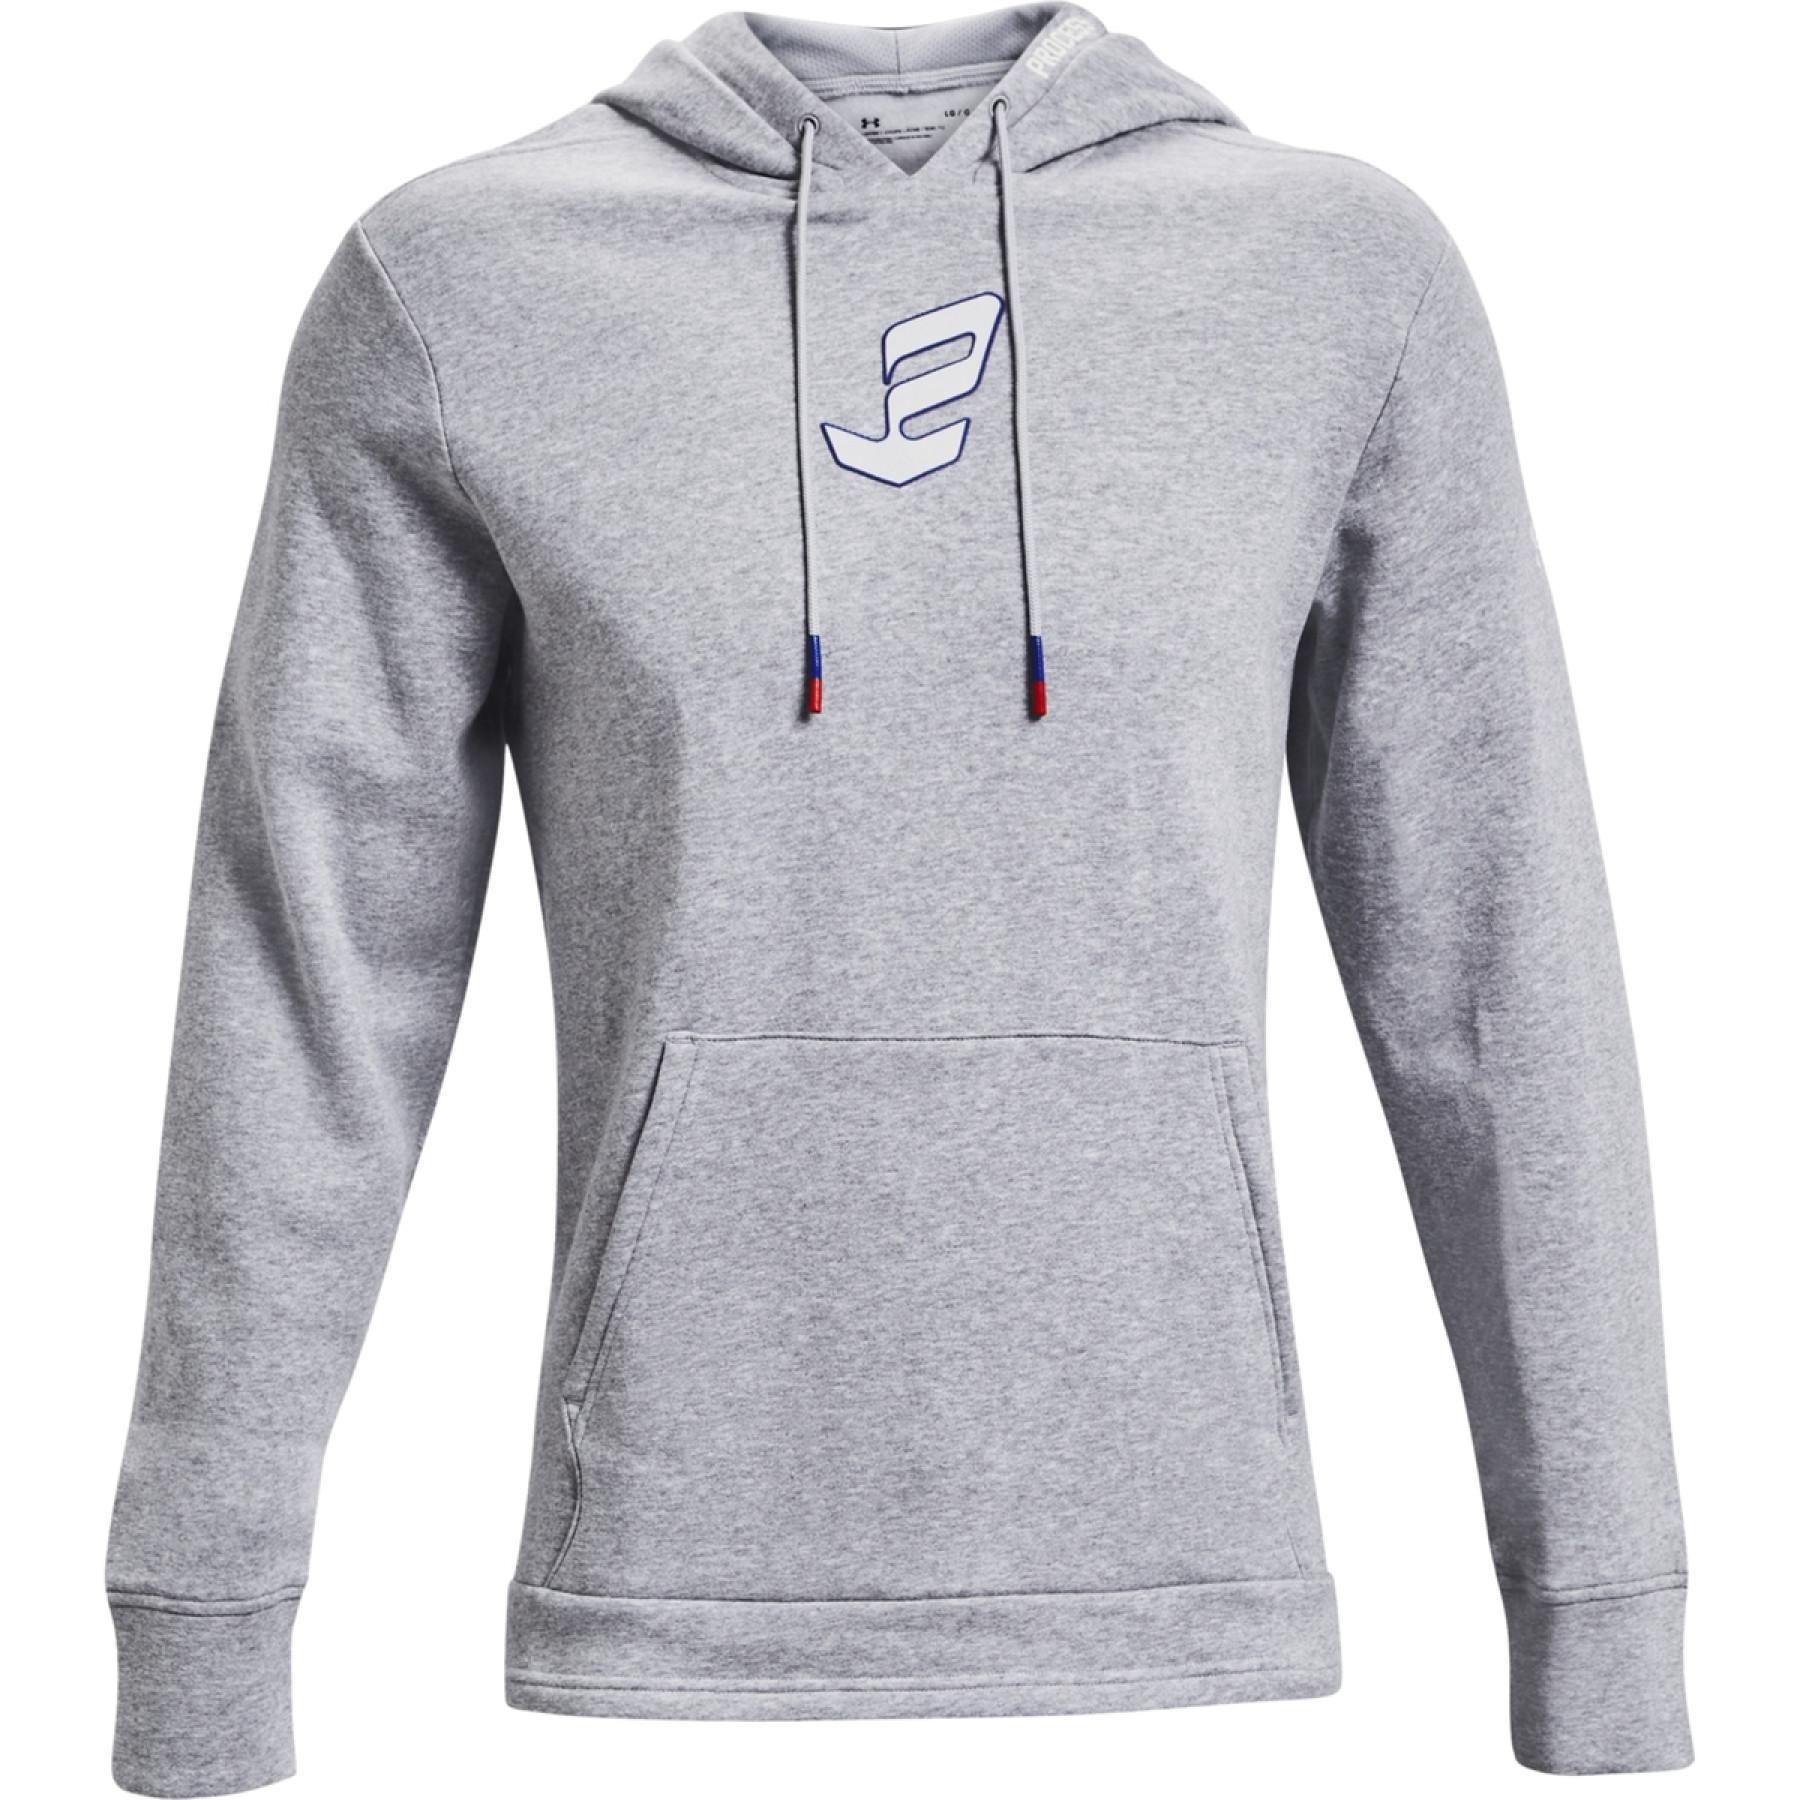 Hoodie Under Armour Embiid Signature